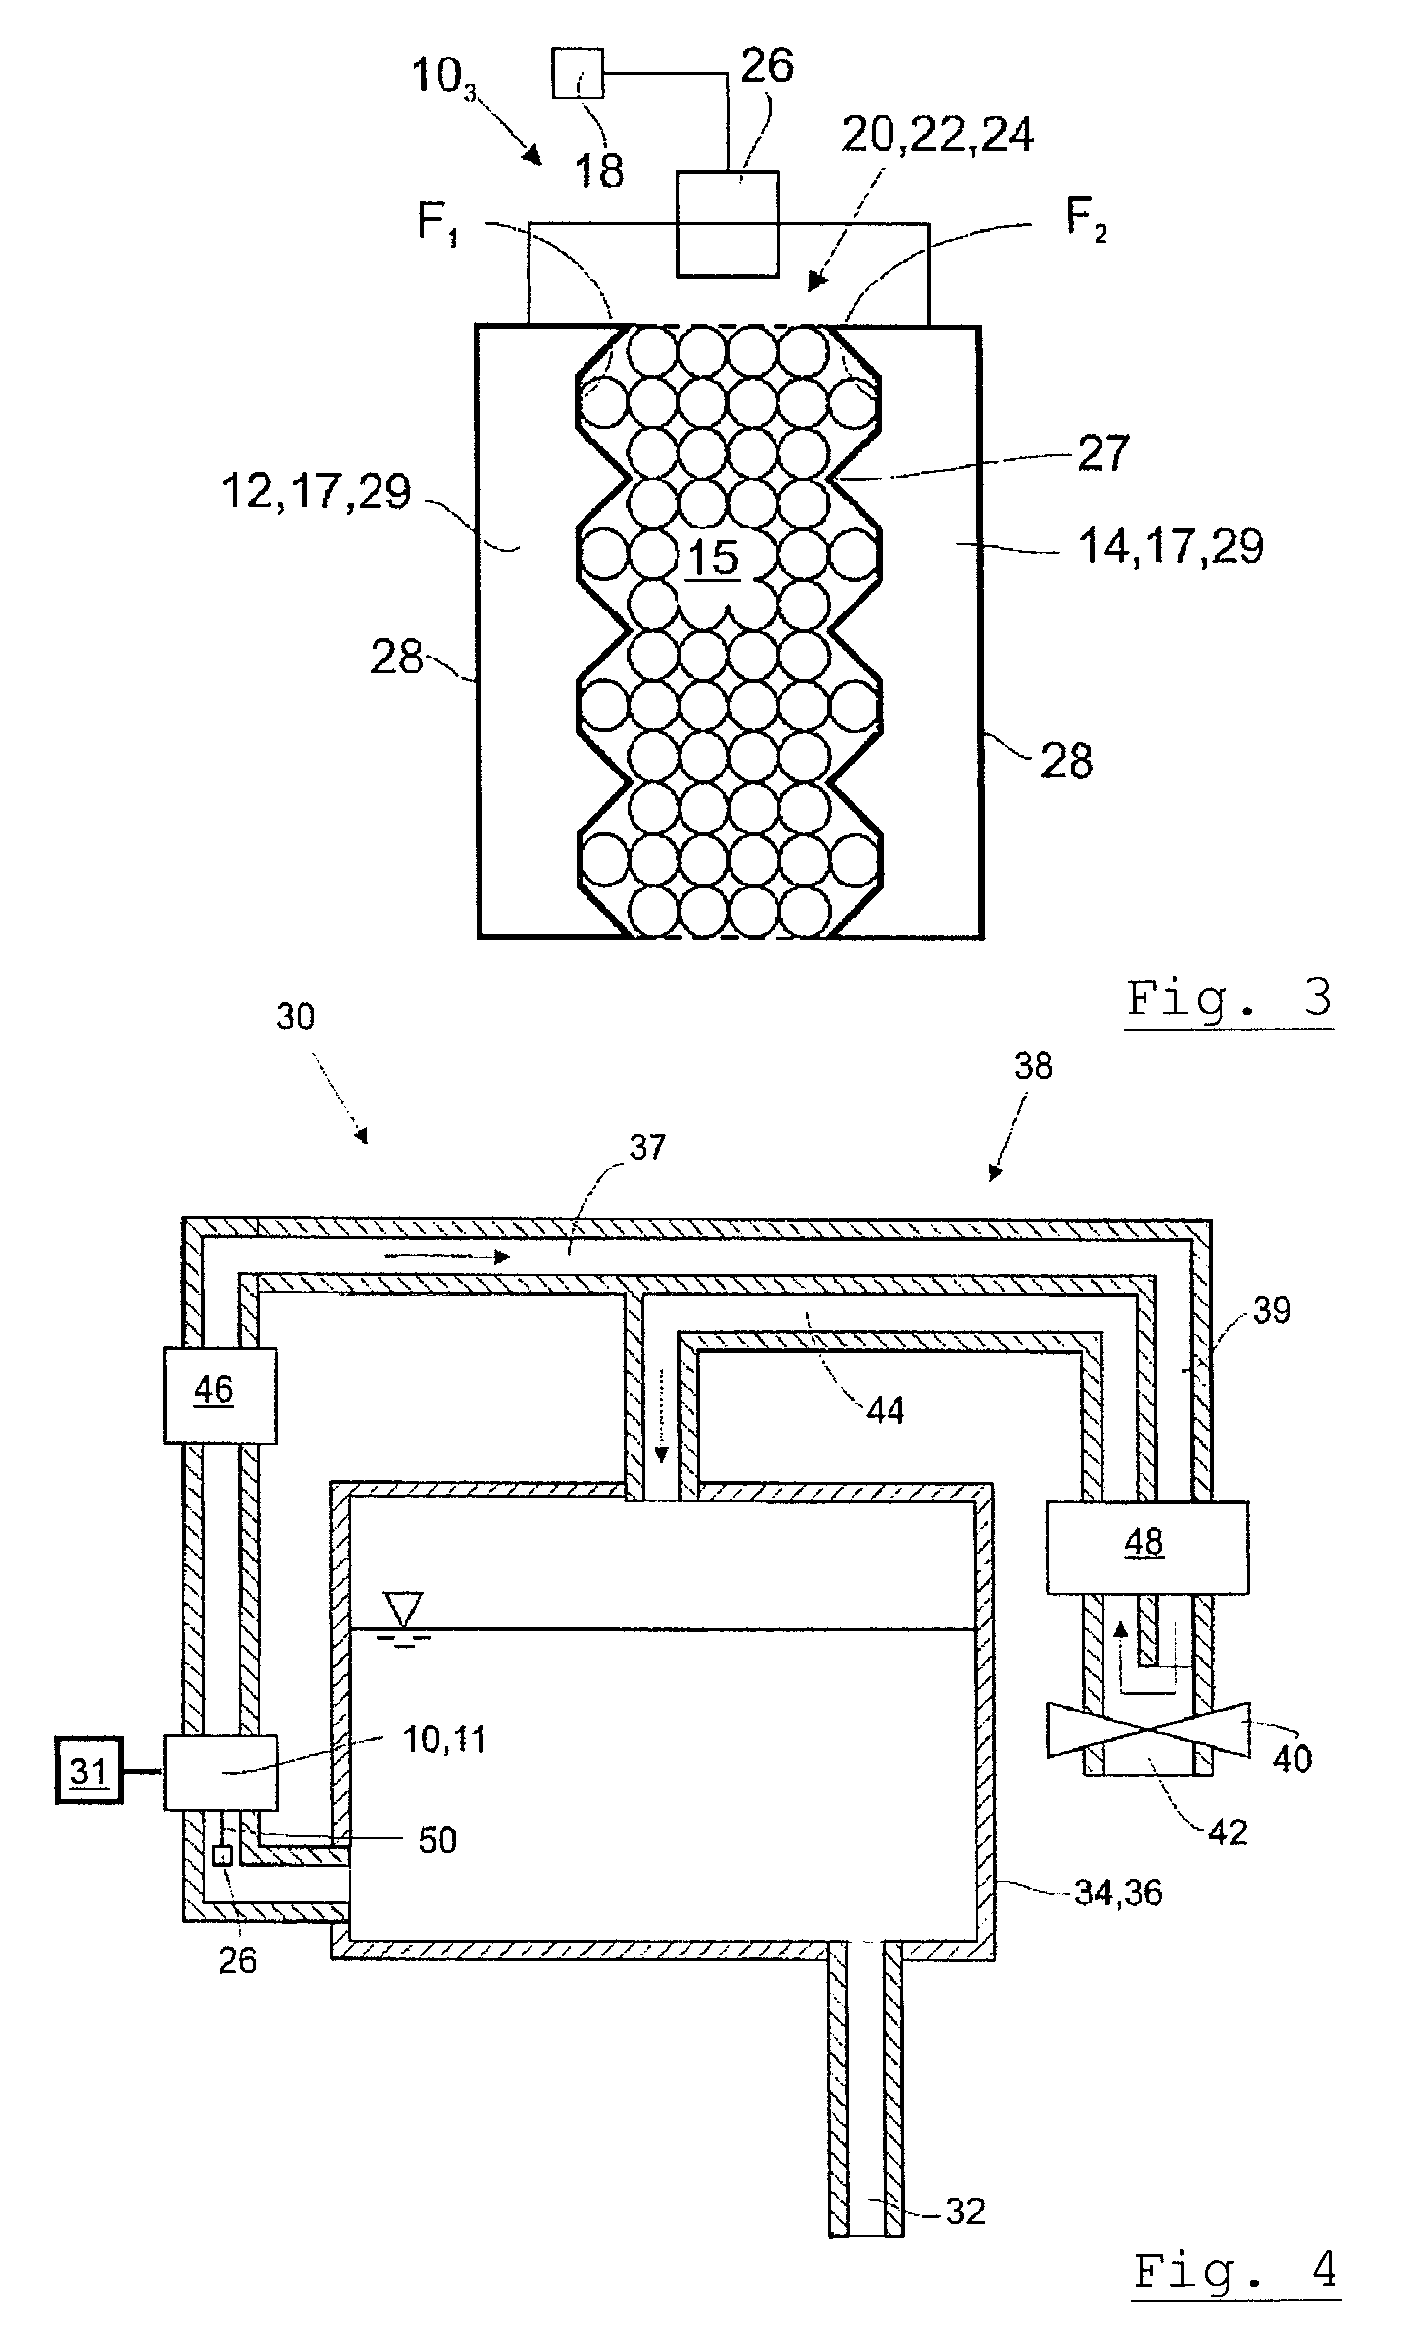 Electrolysis cell for generating ozone for treating a liquid